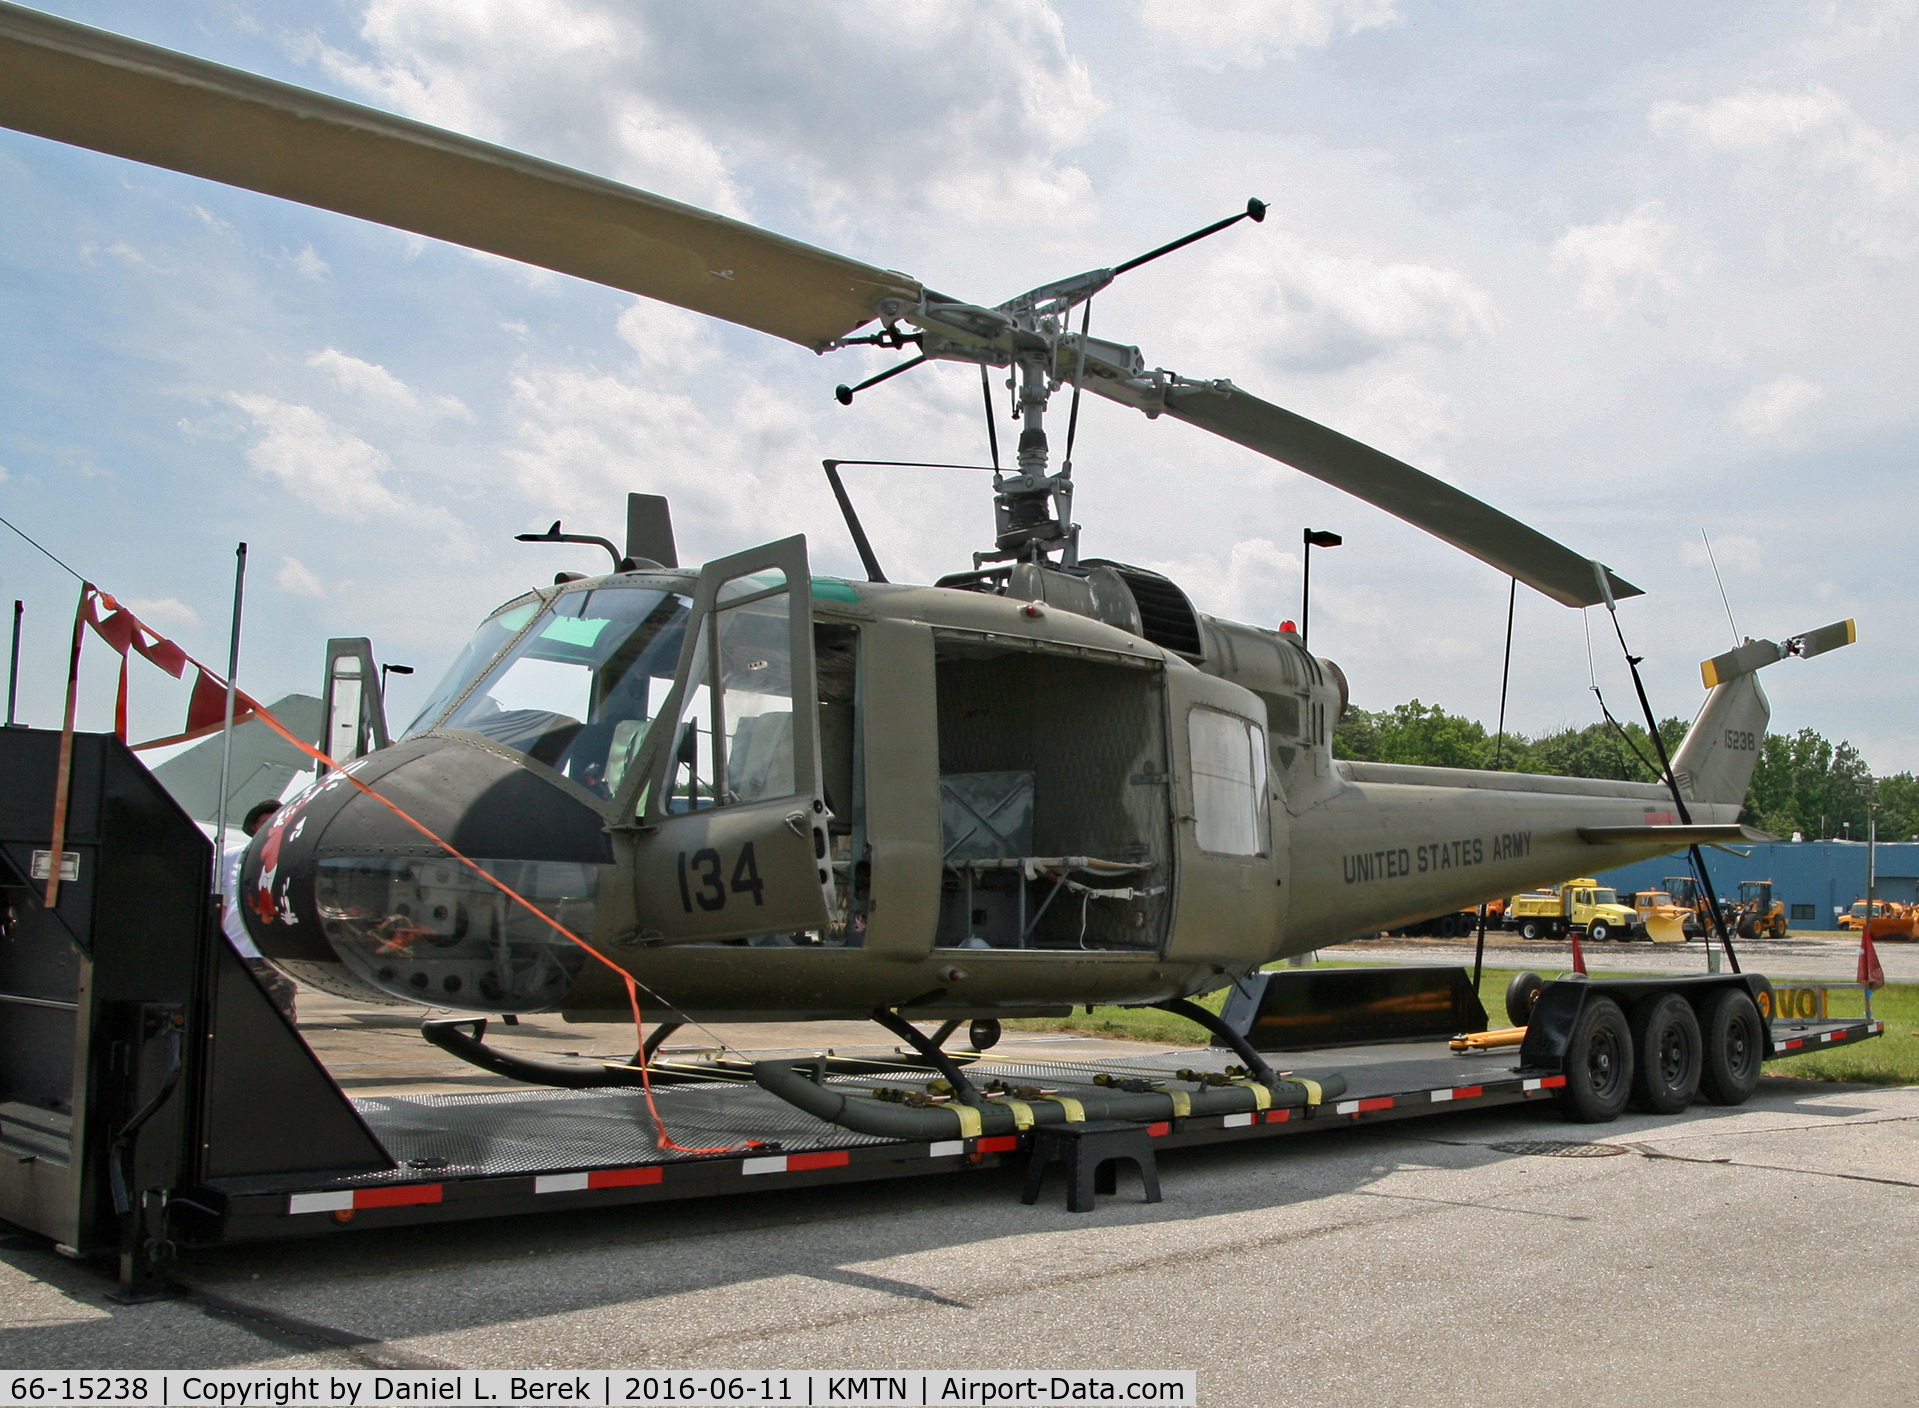 66-15238, 1966 Bell UH-1M Iroquois C/N 1966, A popular exhibit at the Glenn Martin Aviation Museum is this very nice Huey.